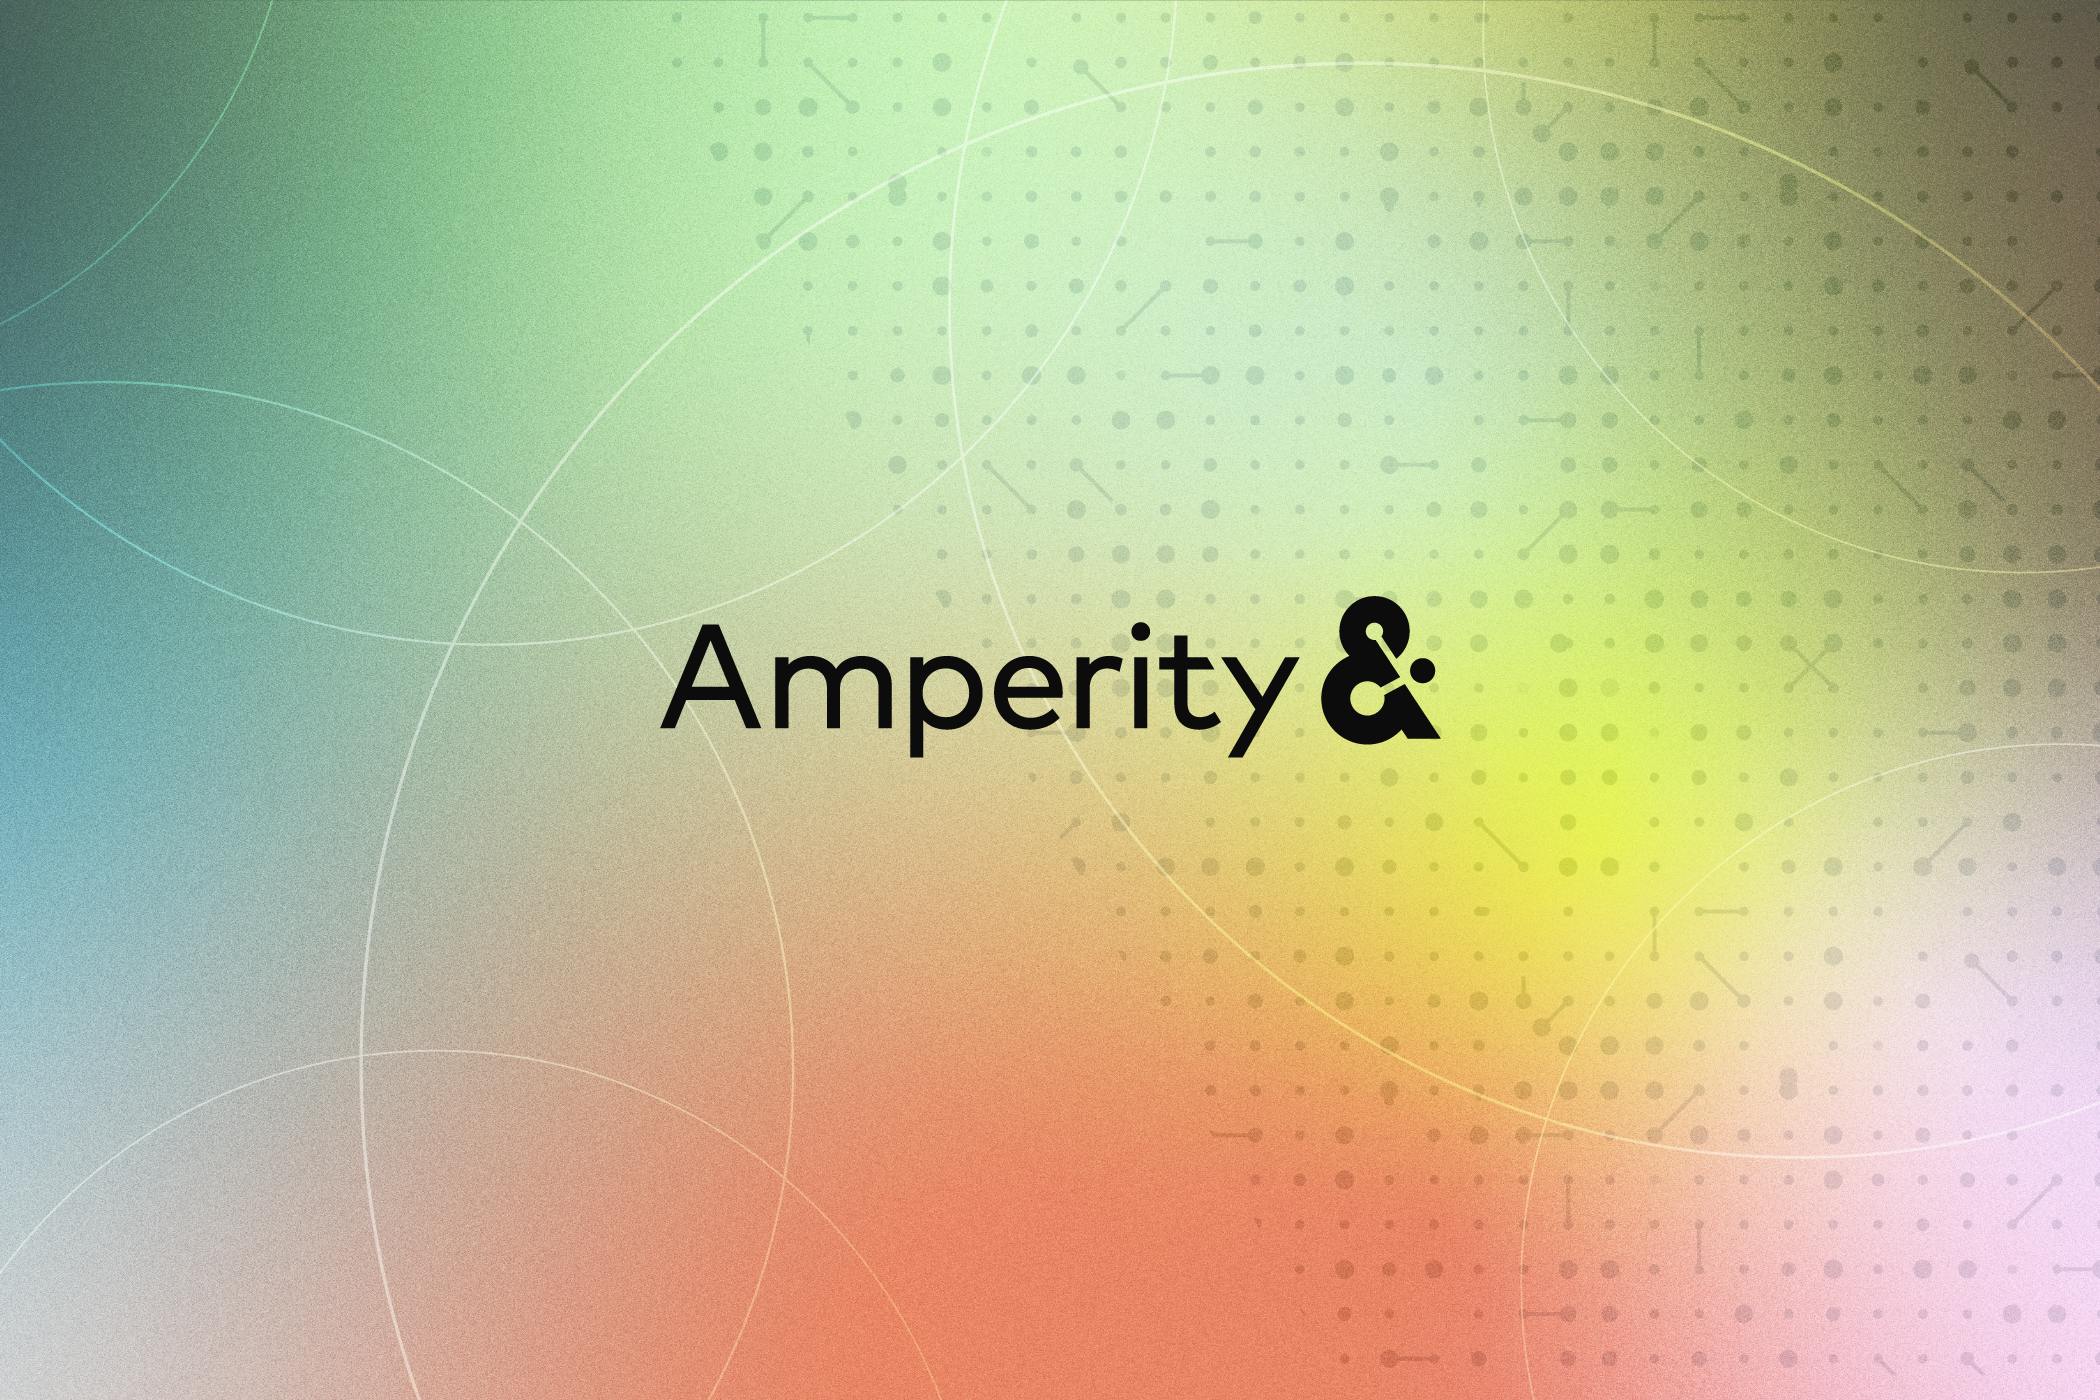 Amperity logo on a multicolored blurred background.